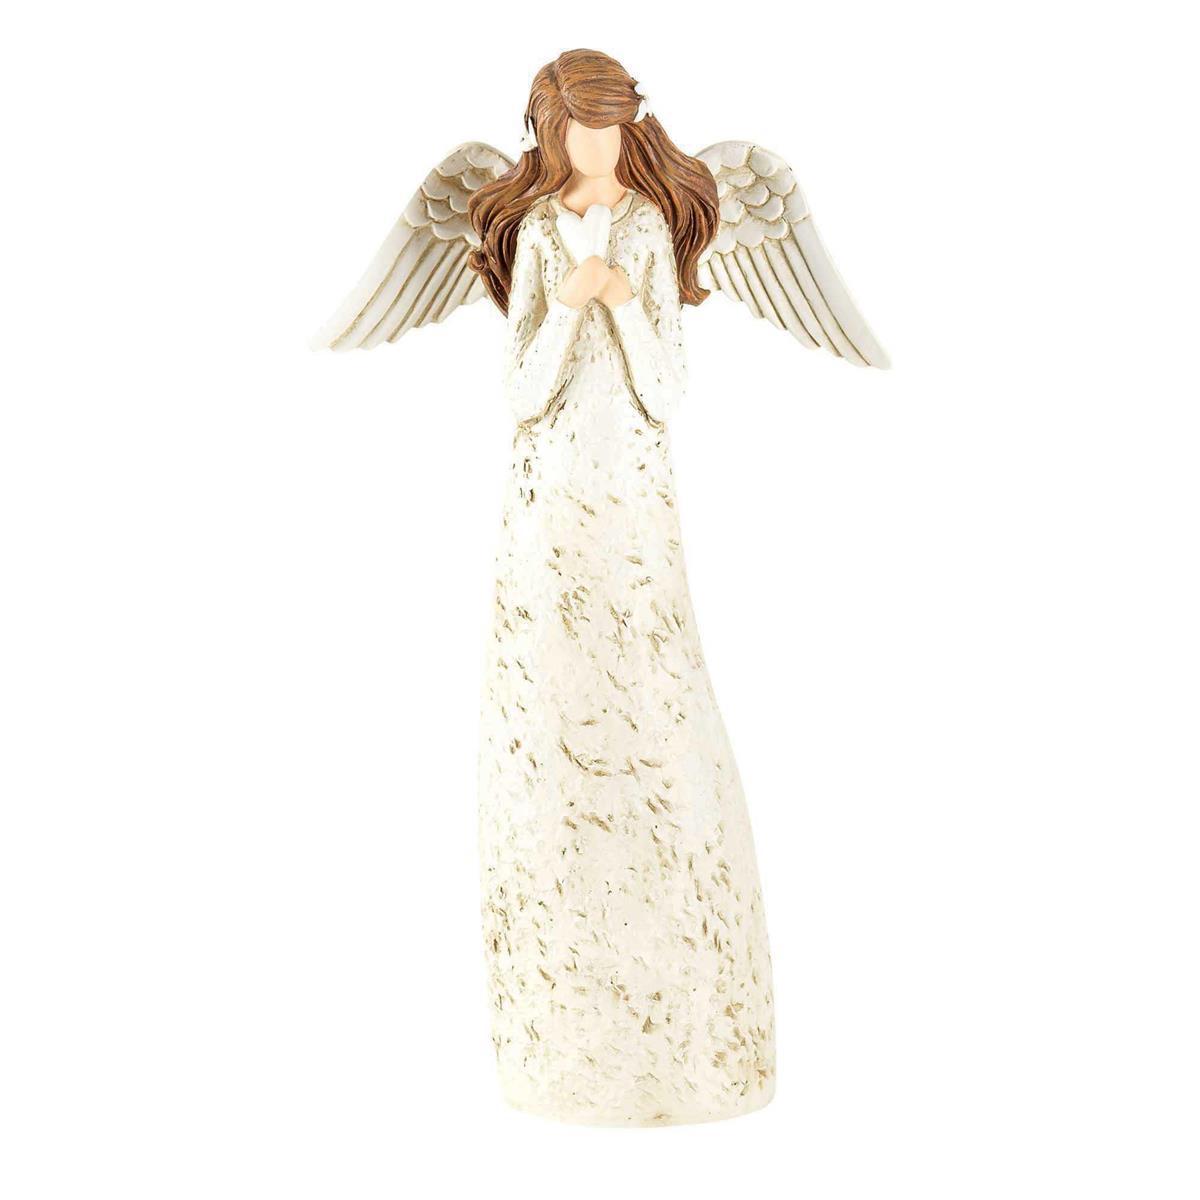 Resin Angel with Heart